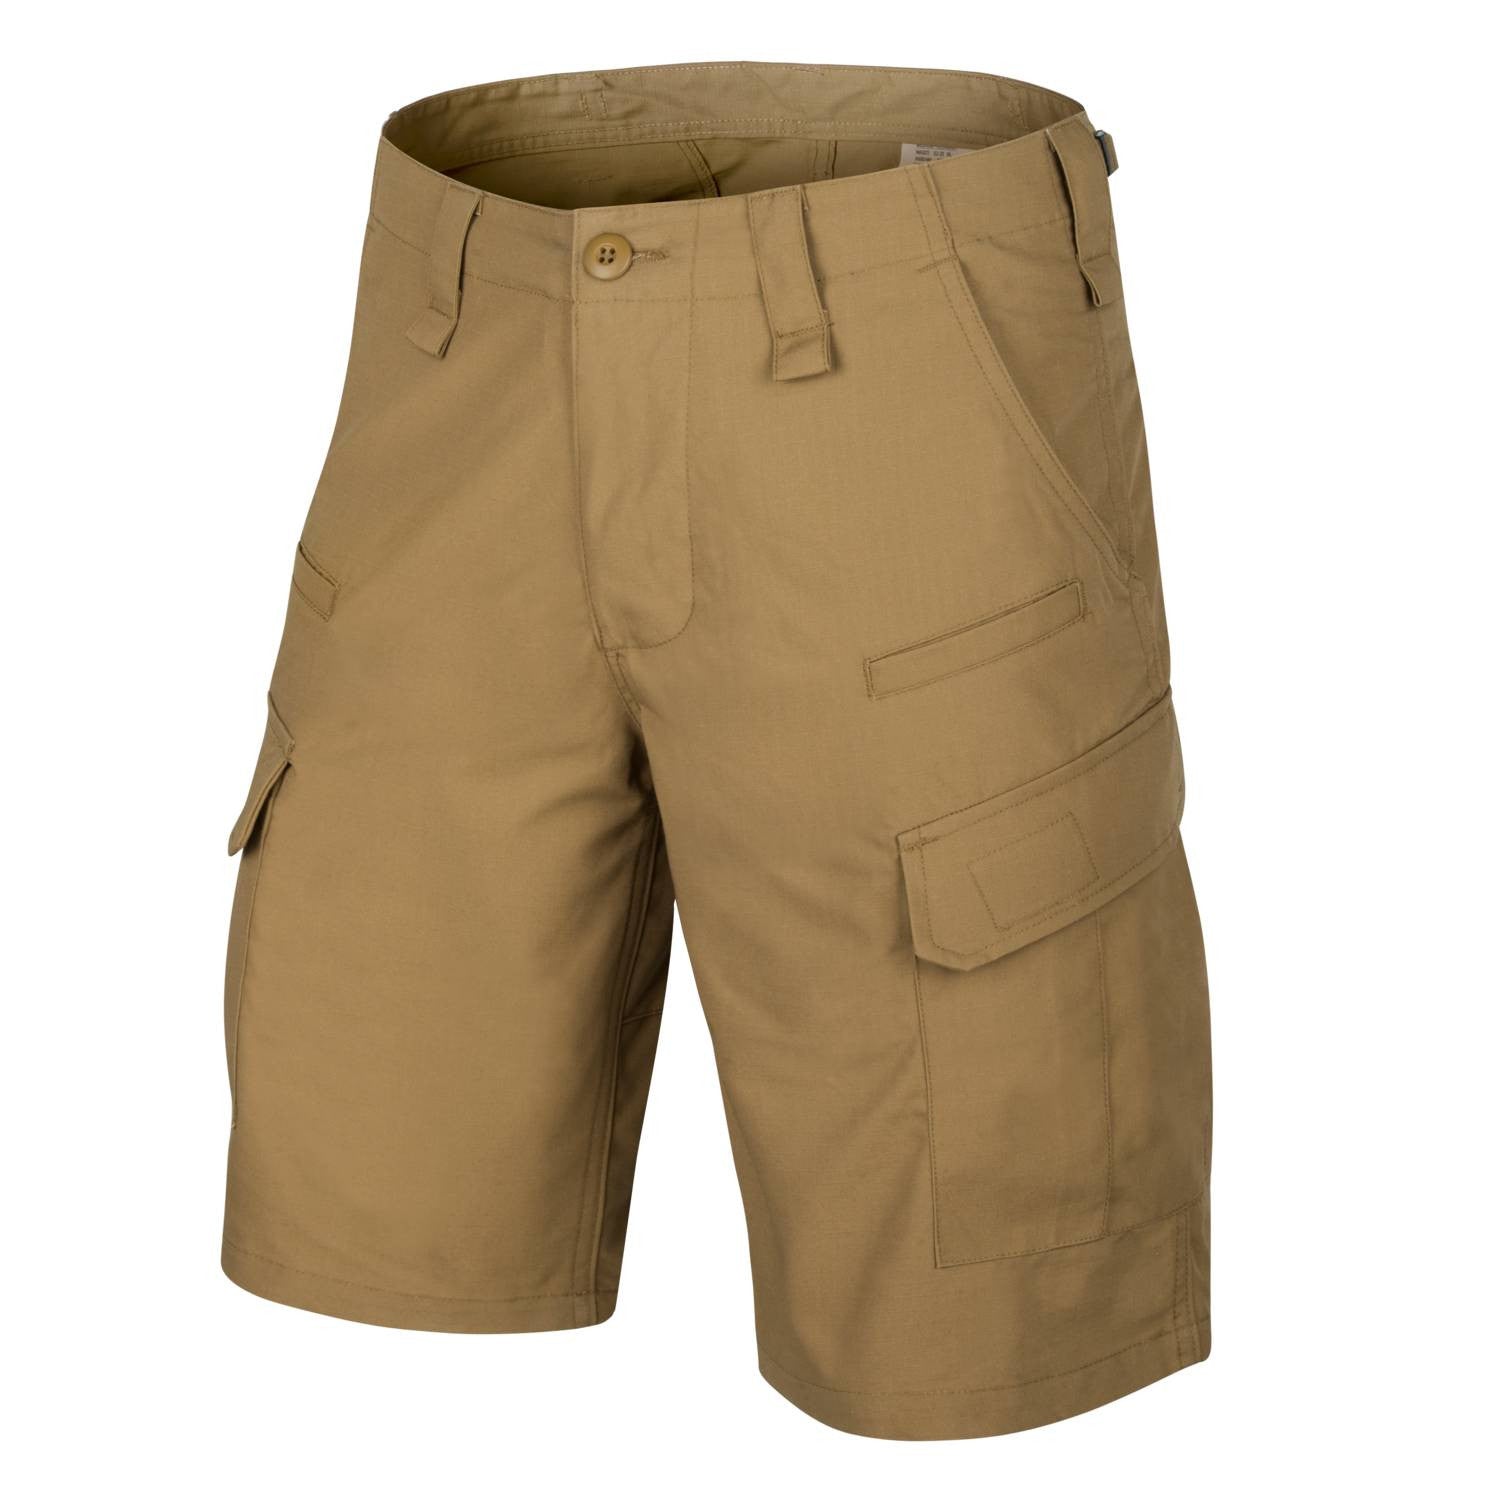 CPU Shorts Plycotton Ripstop Coyote